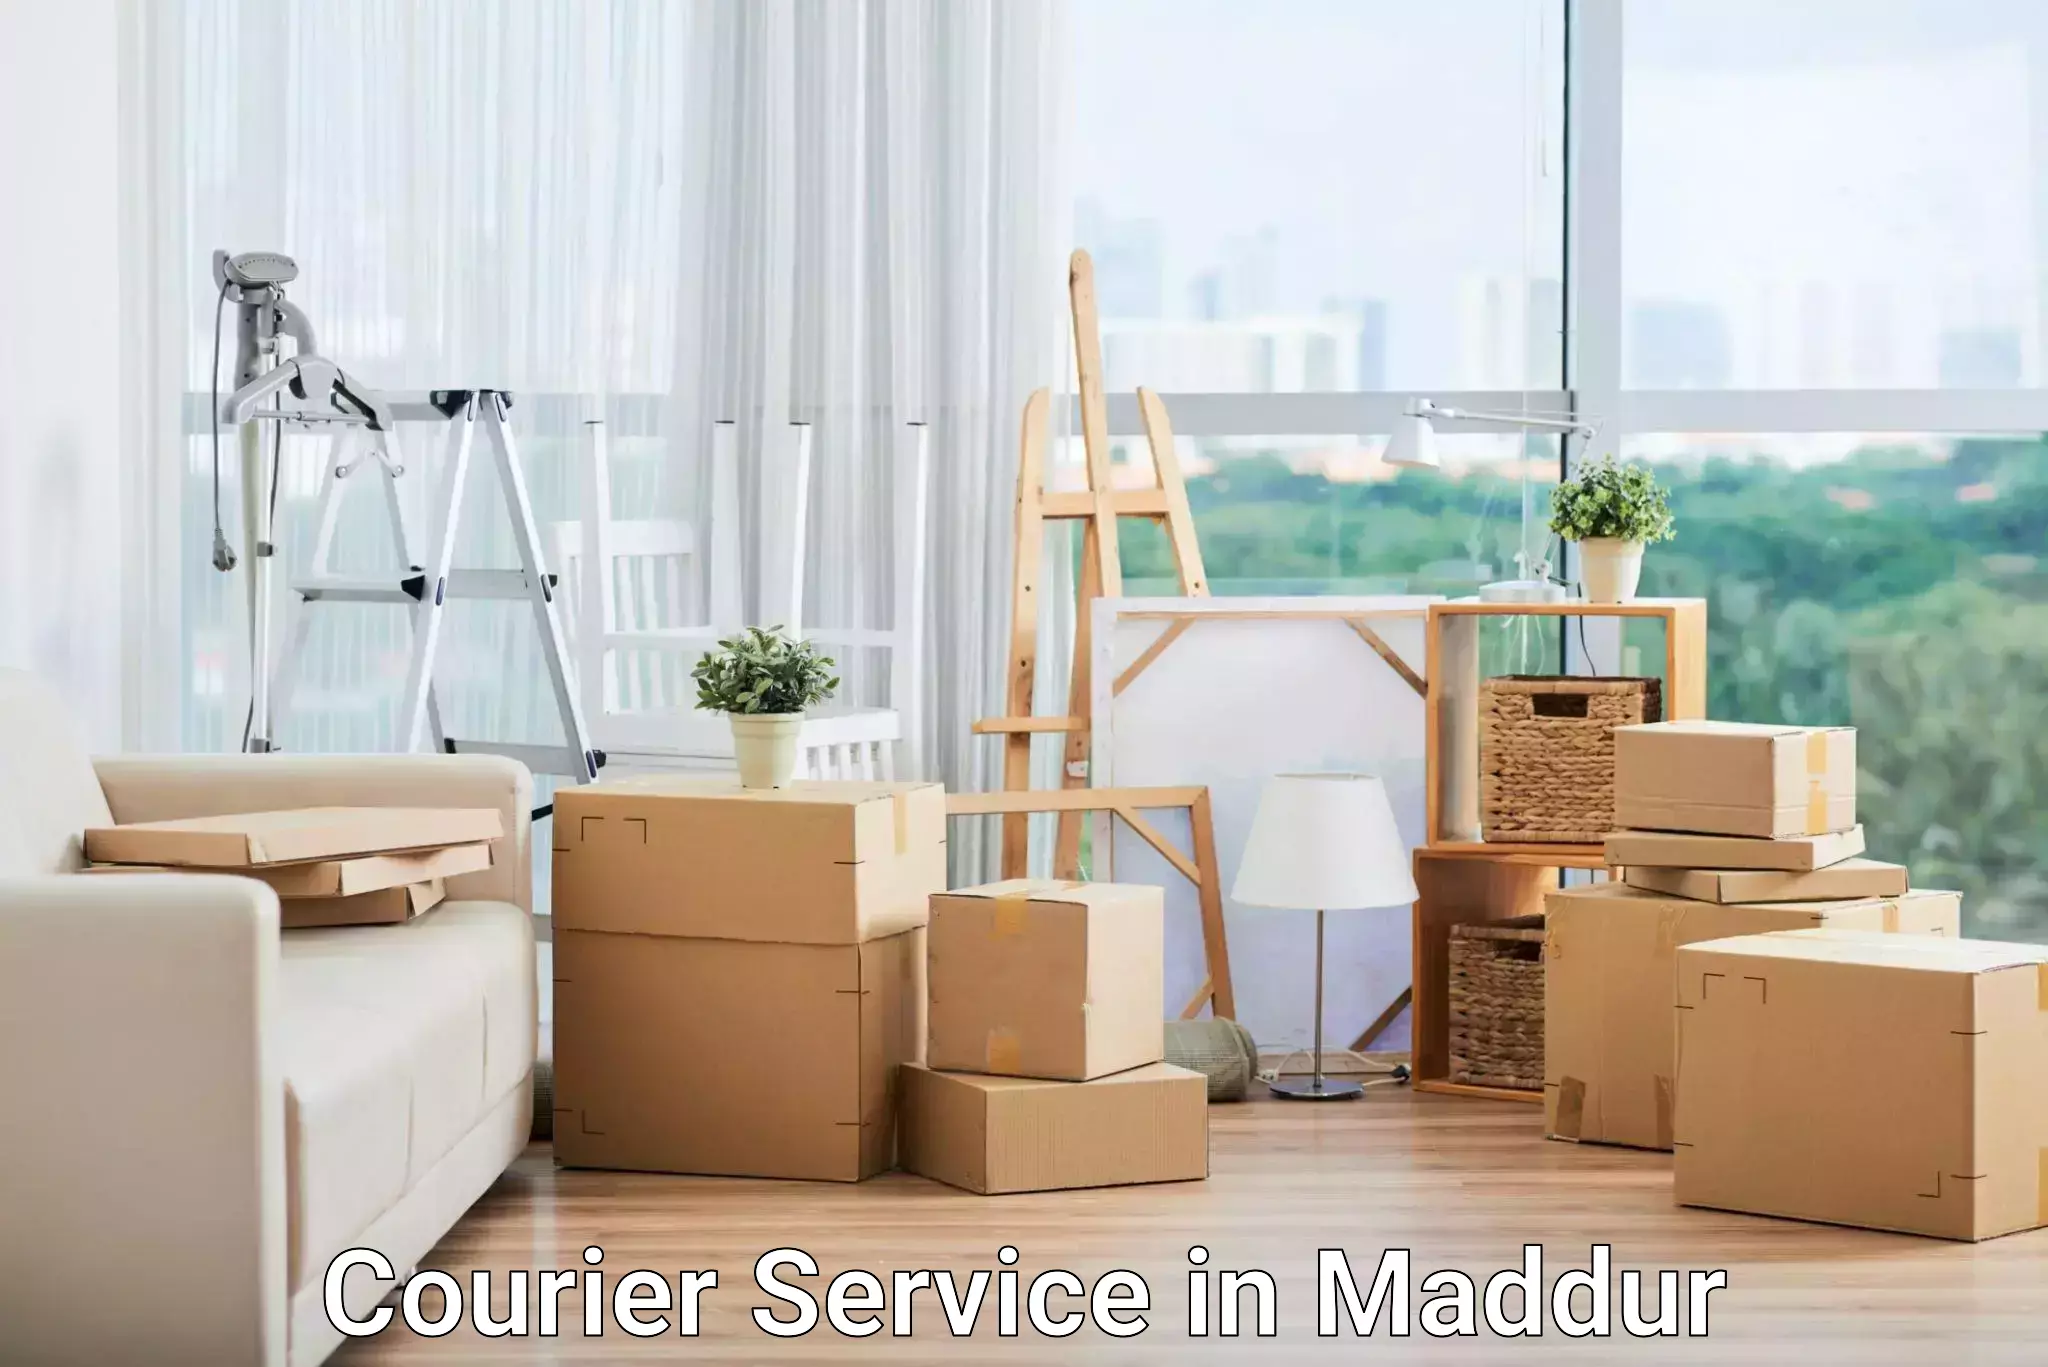 Flexible shipping options in Maddur